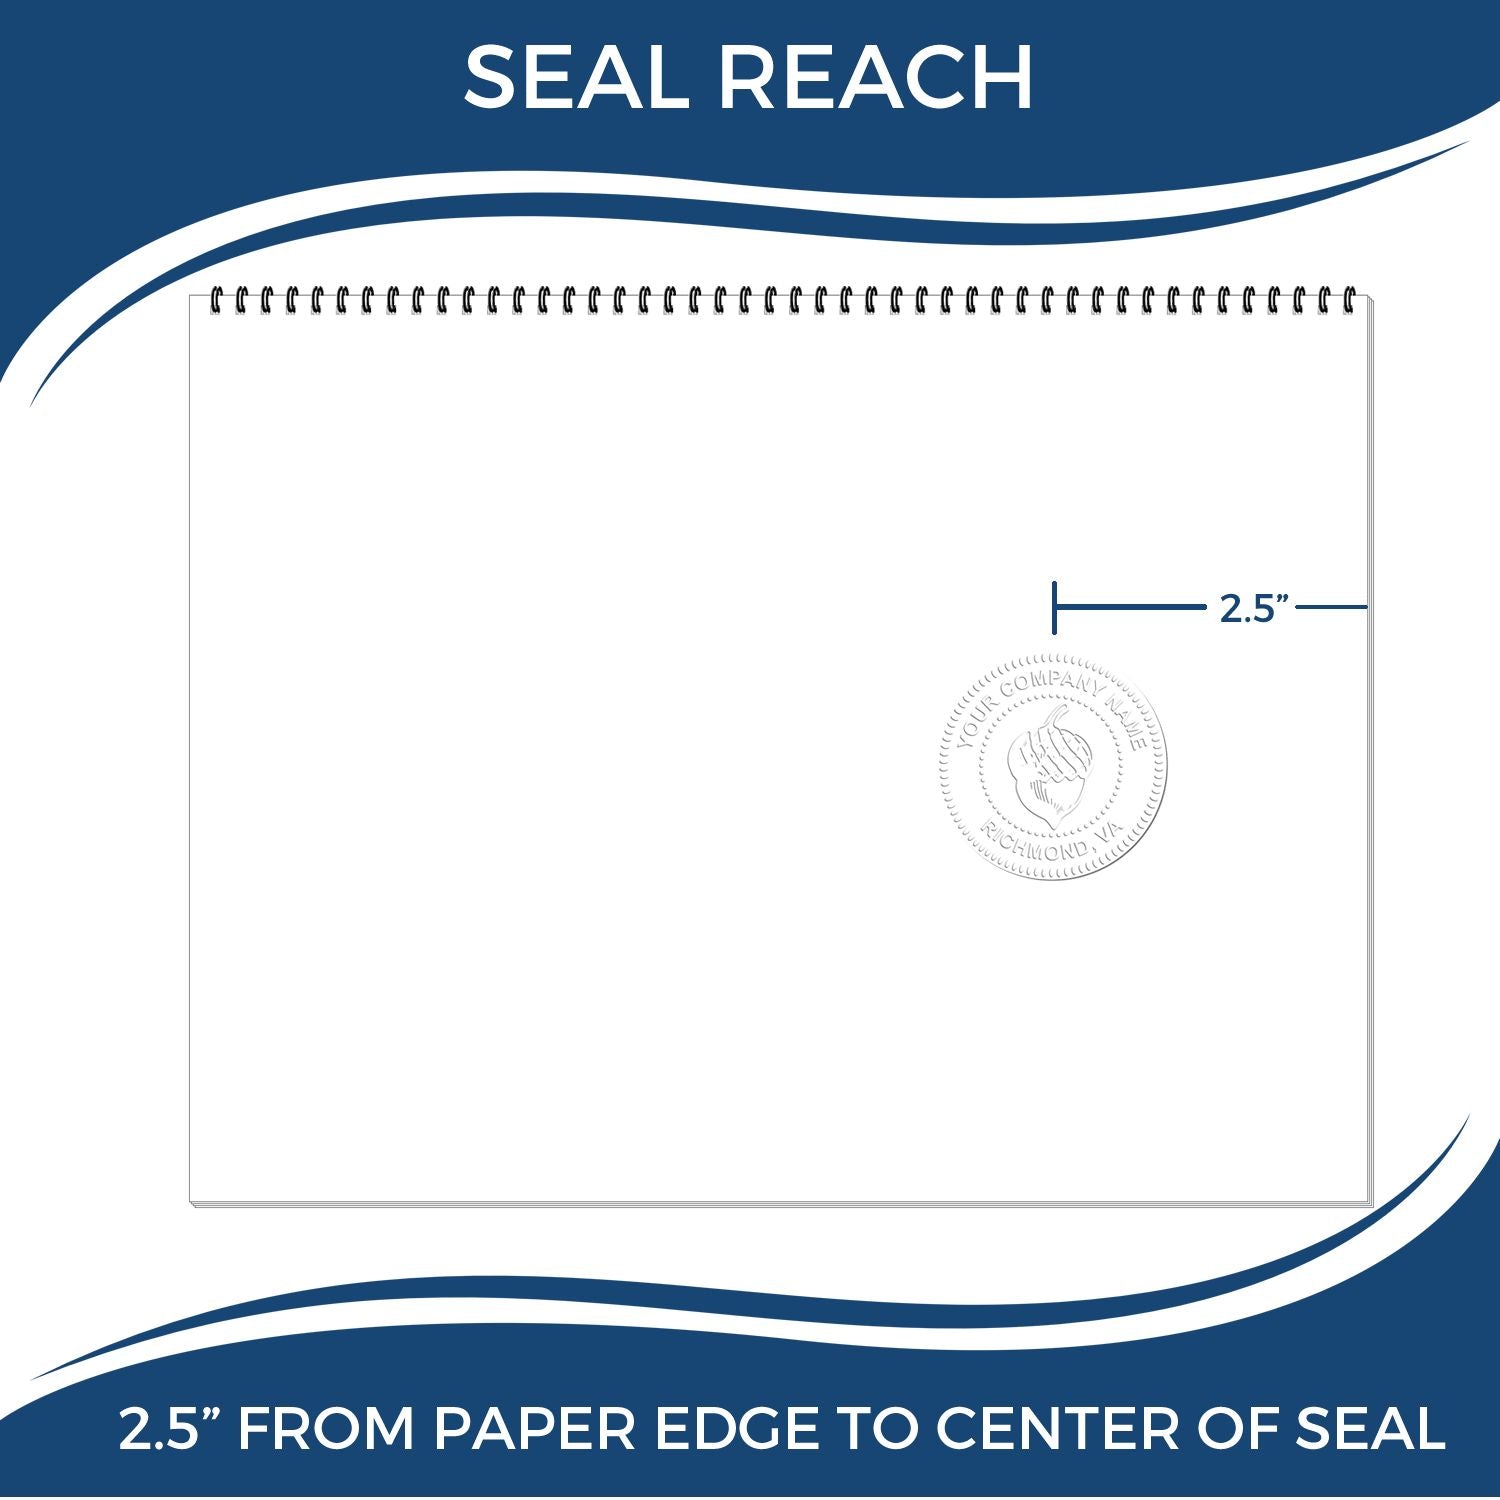 An infographic showing the seal reach which is represented by a ruler and a miniature seal image of the Long Reach Minnesota PE Seal